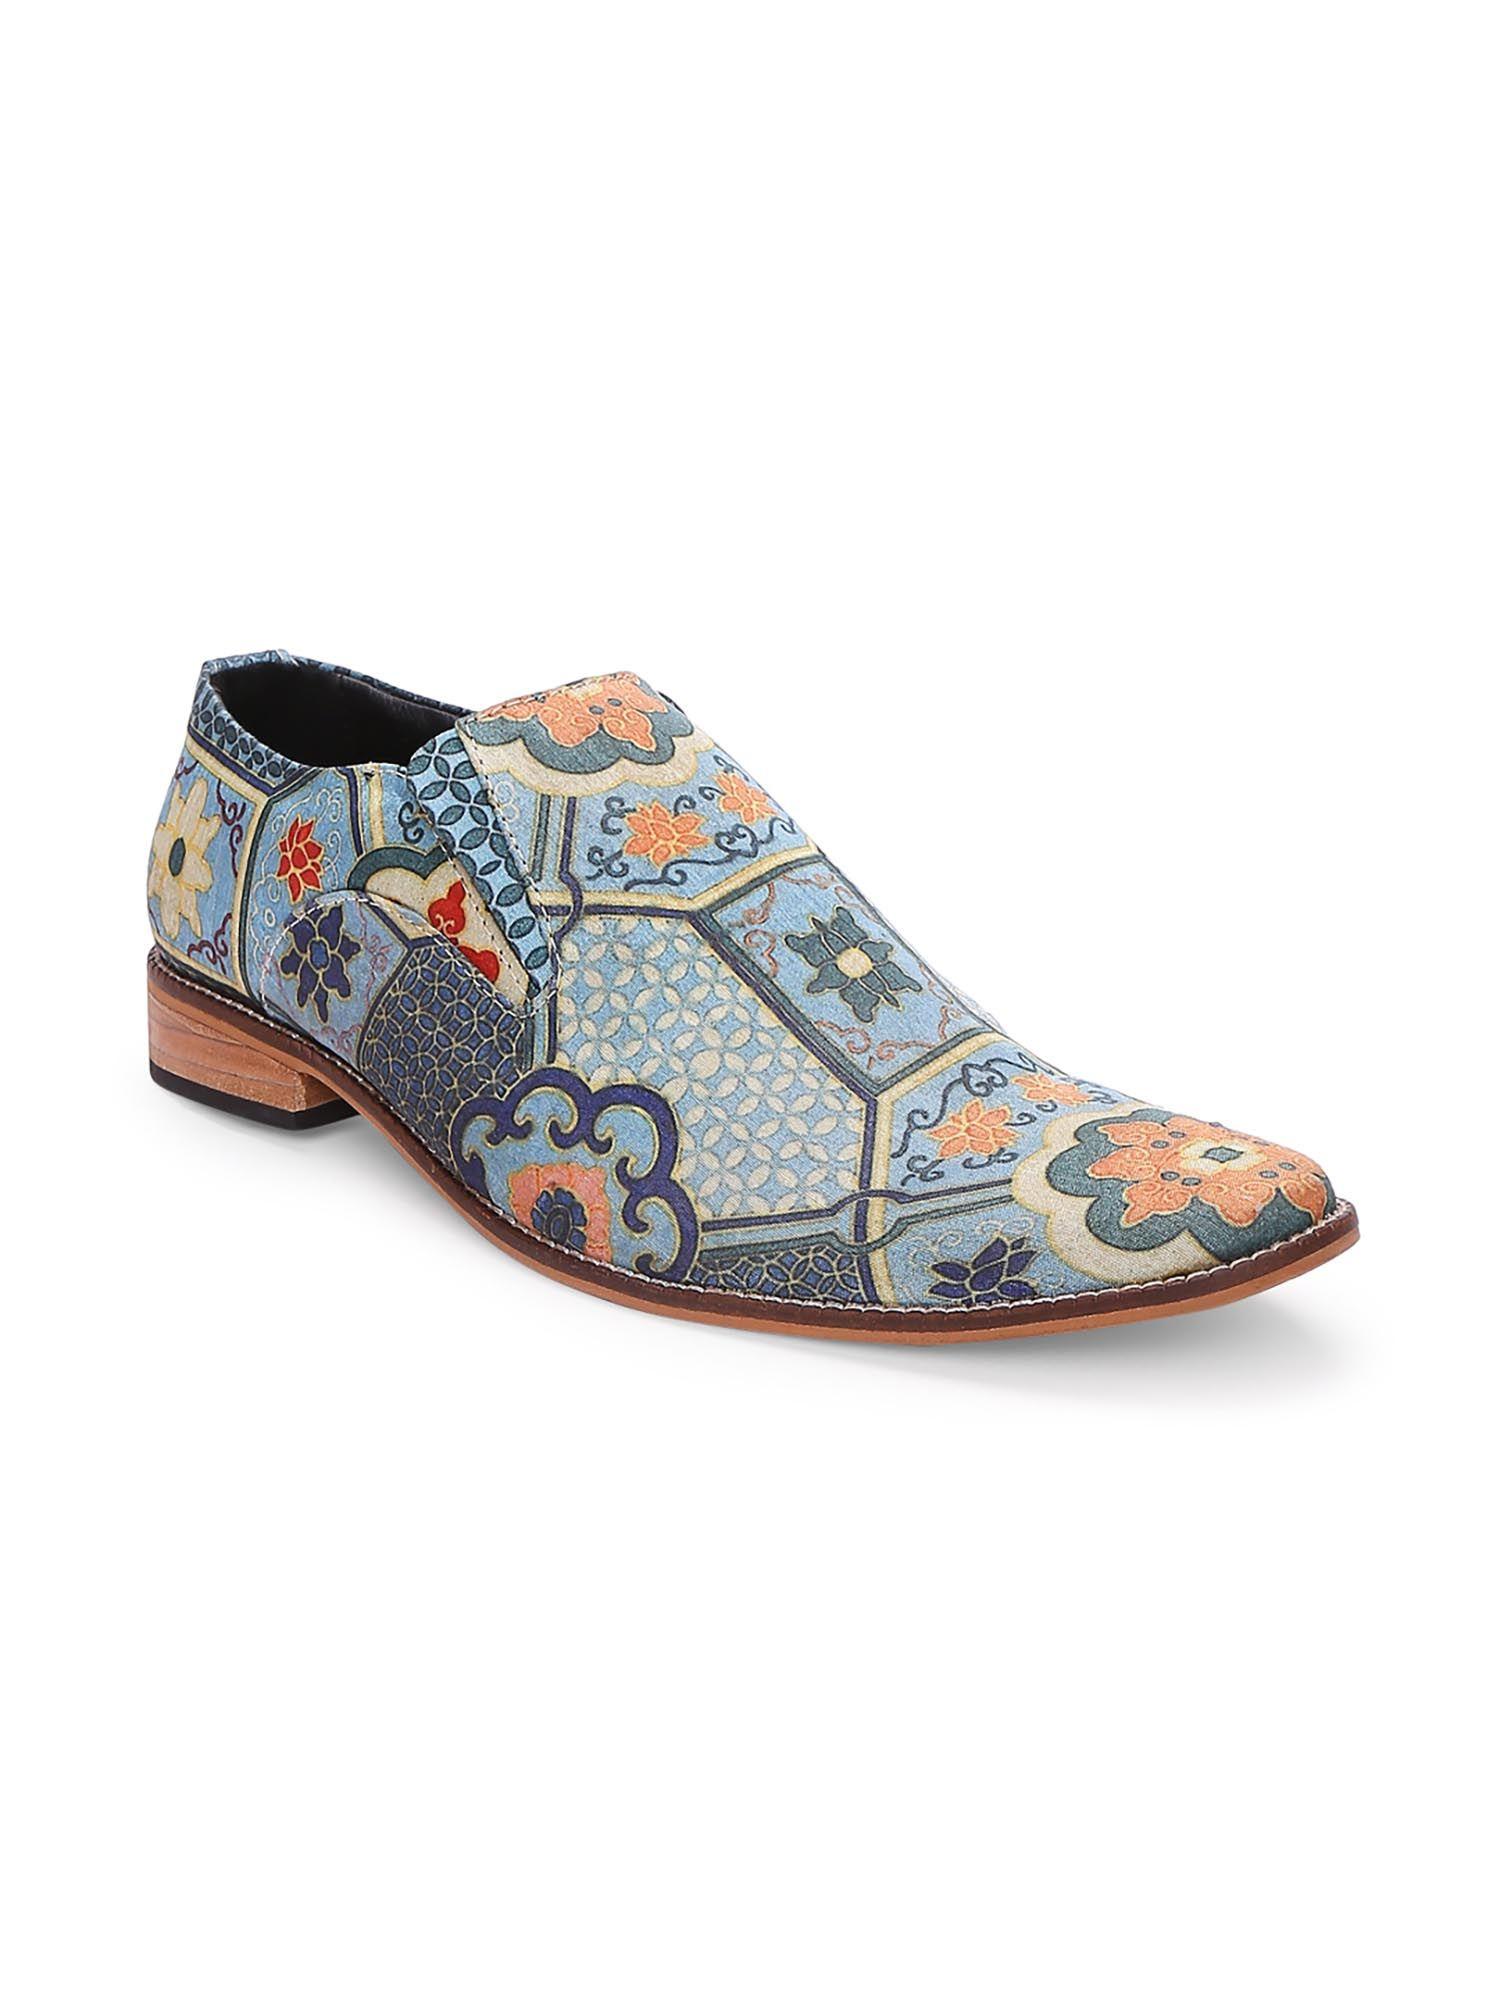 multi-color-printed-slip-on-casual-shoes